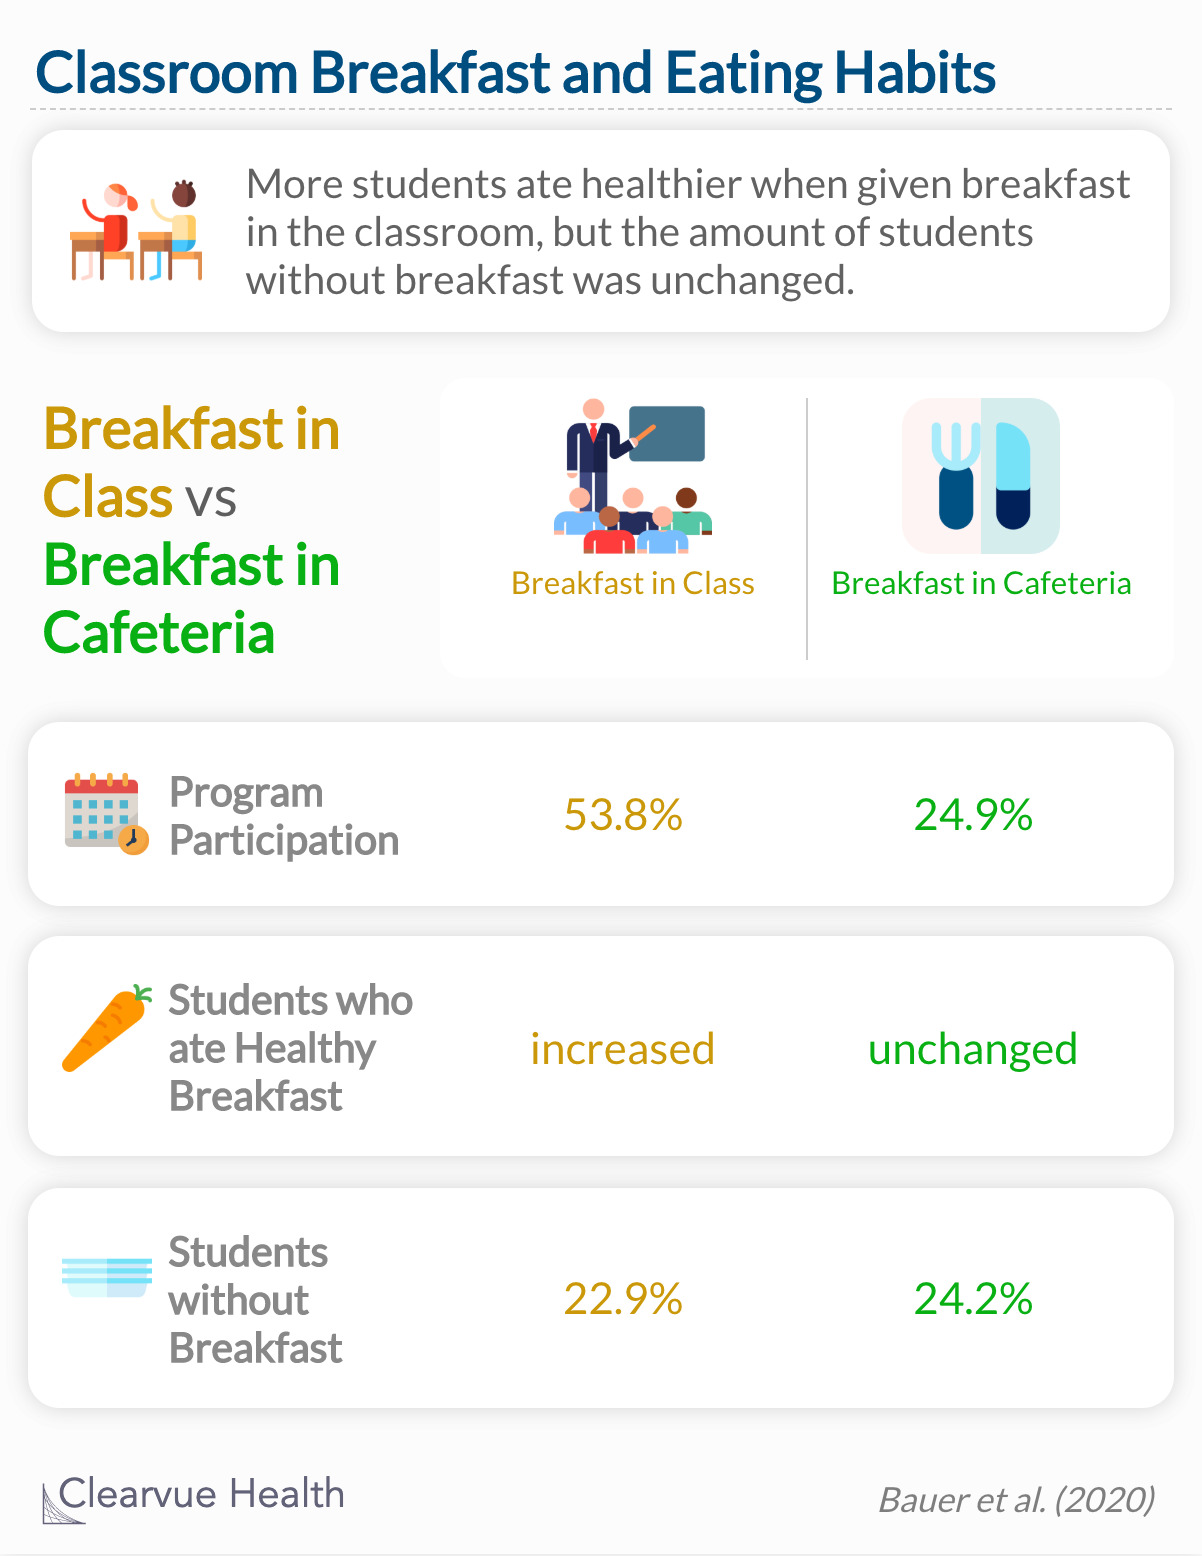 More students ate healthier when given breakfast in the classroom, but the amount of students without breakfast was unchanged. 